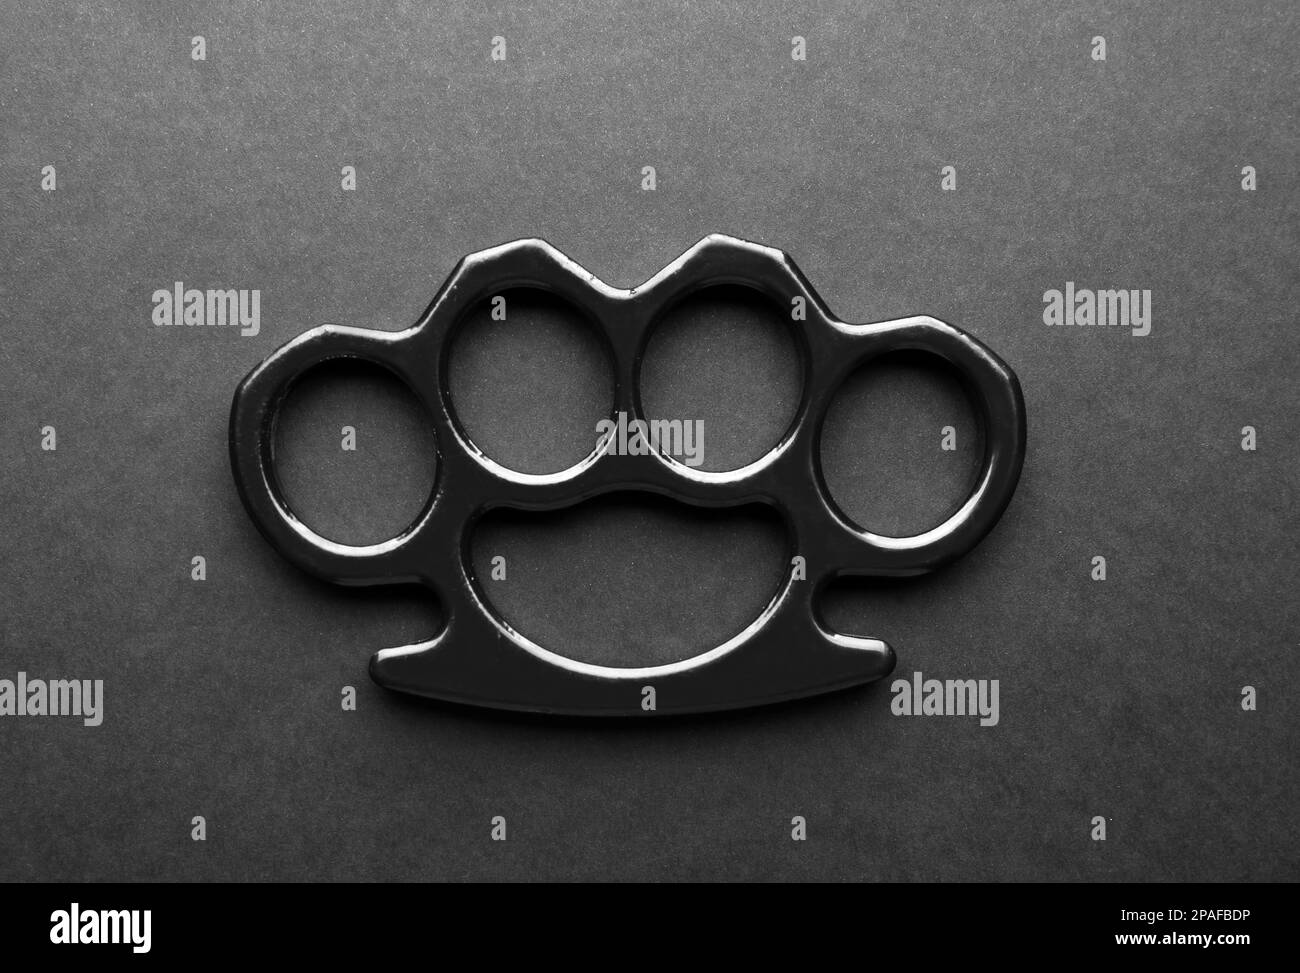 Brass knuckle ring Black and White Stock Photos & Images - Alamy